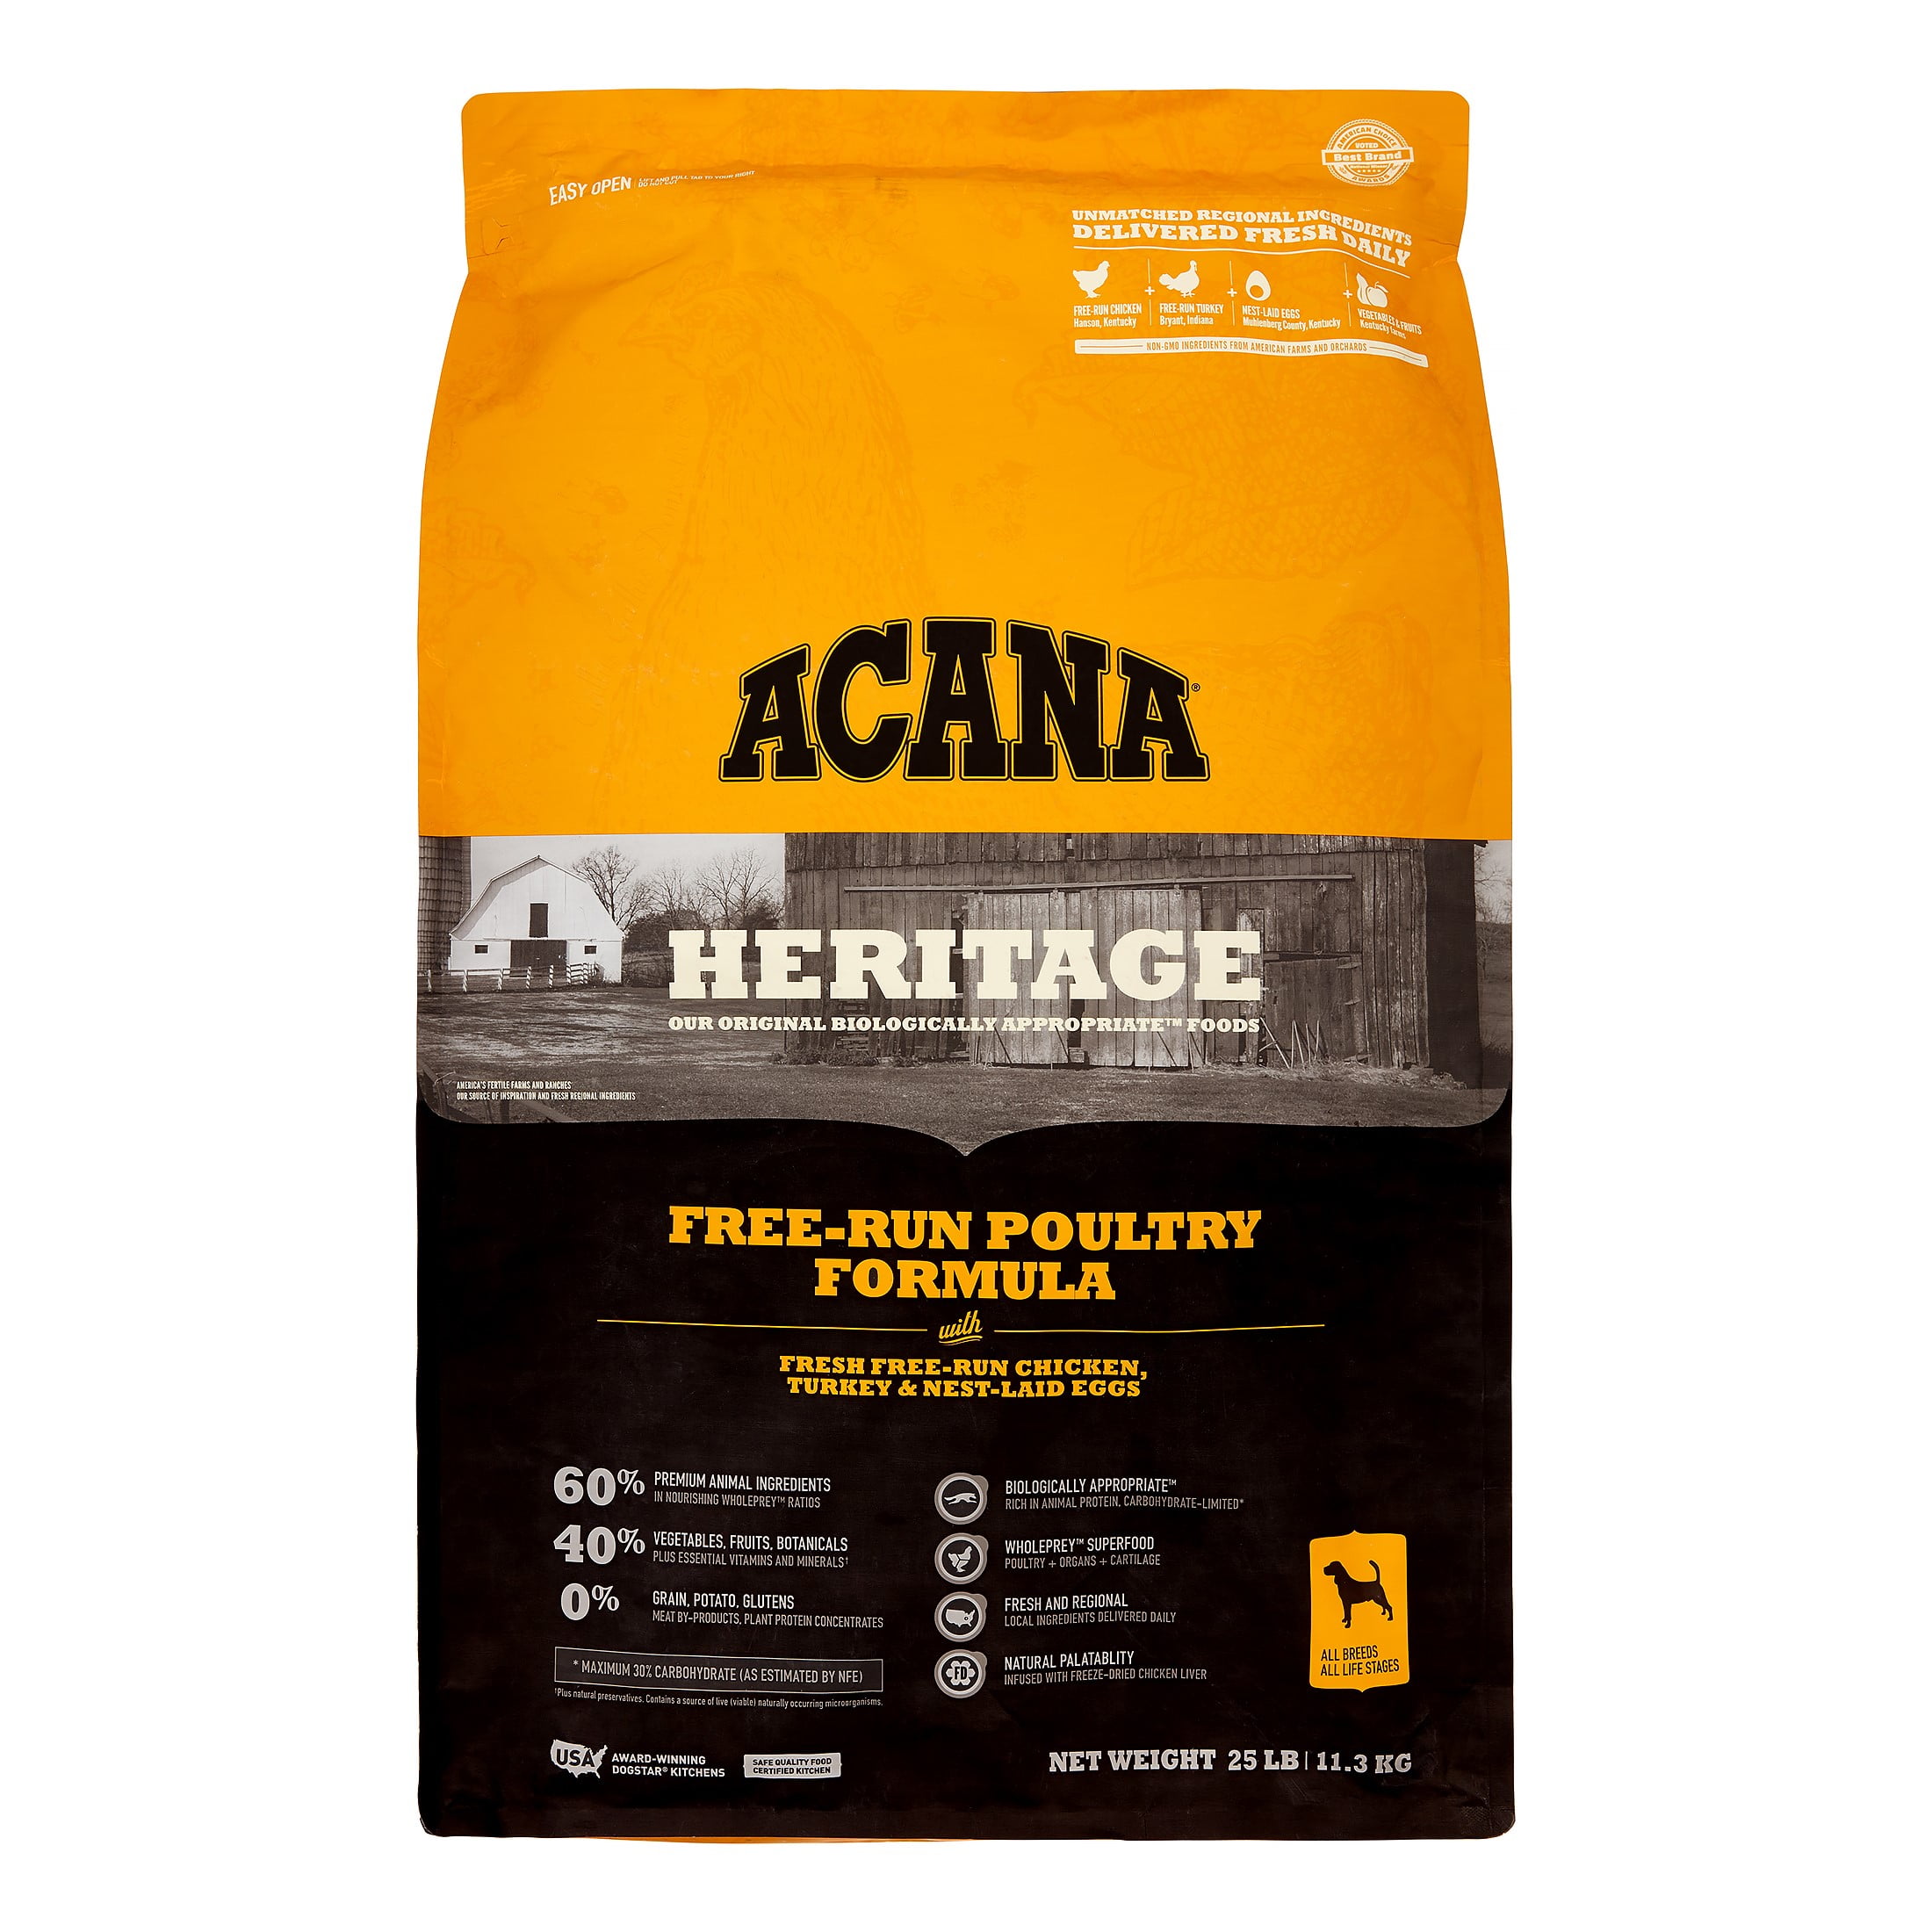 Acana Heritage Free-Run Poultry Formula 